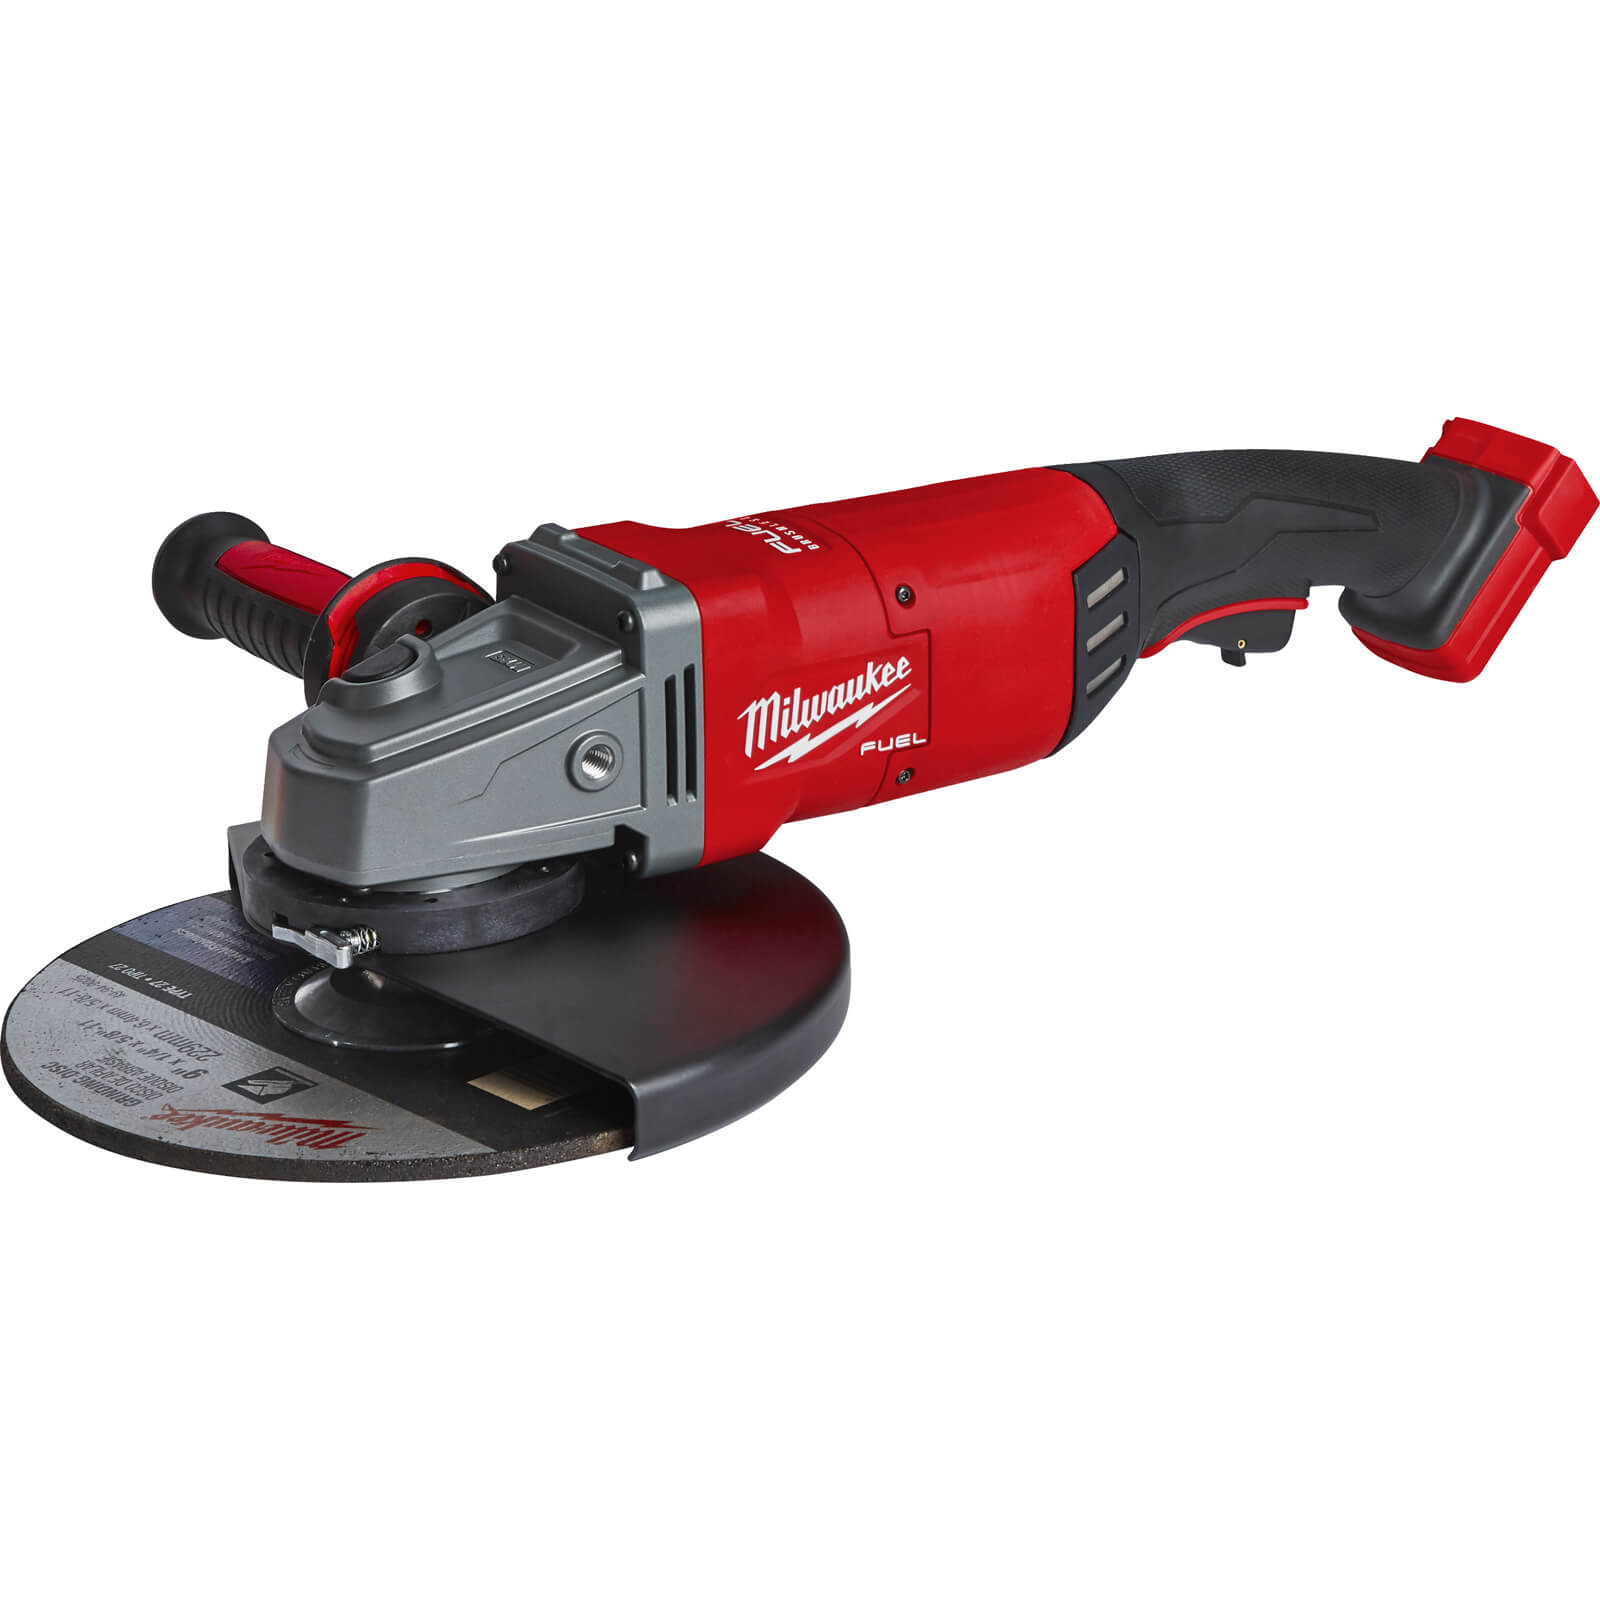 Milwaukee M18 FLAG230XPDB Fuel 18v Cordless Brushless Angle Grinder 230mm No Batteries No Charger Case